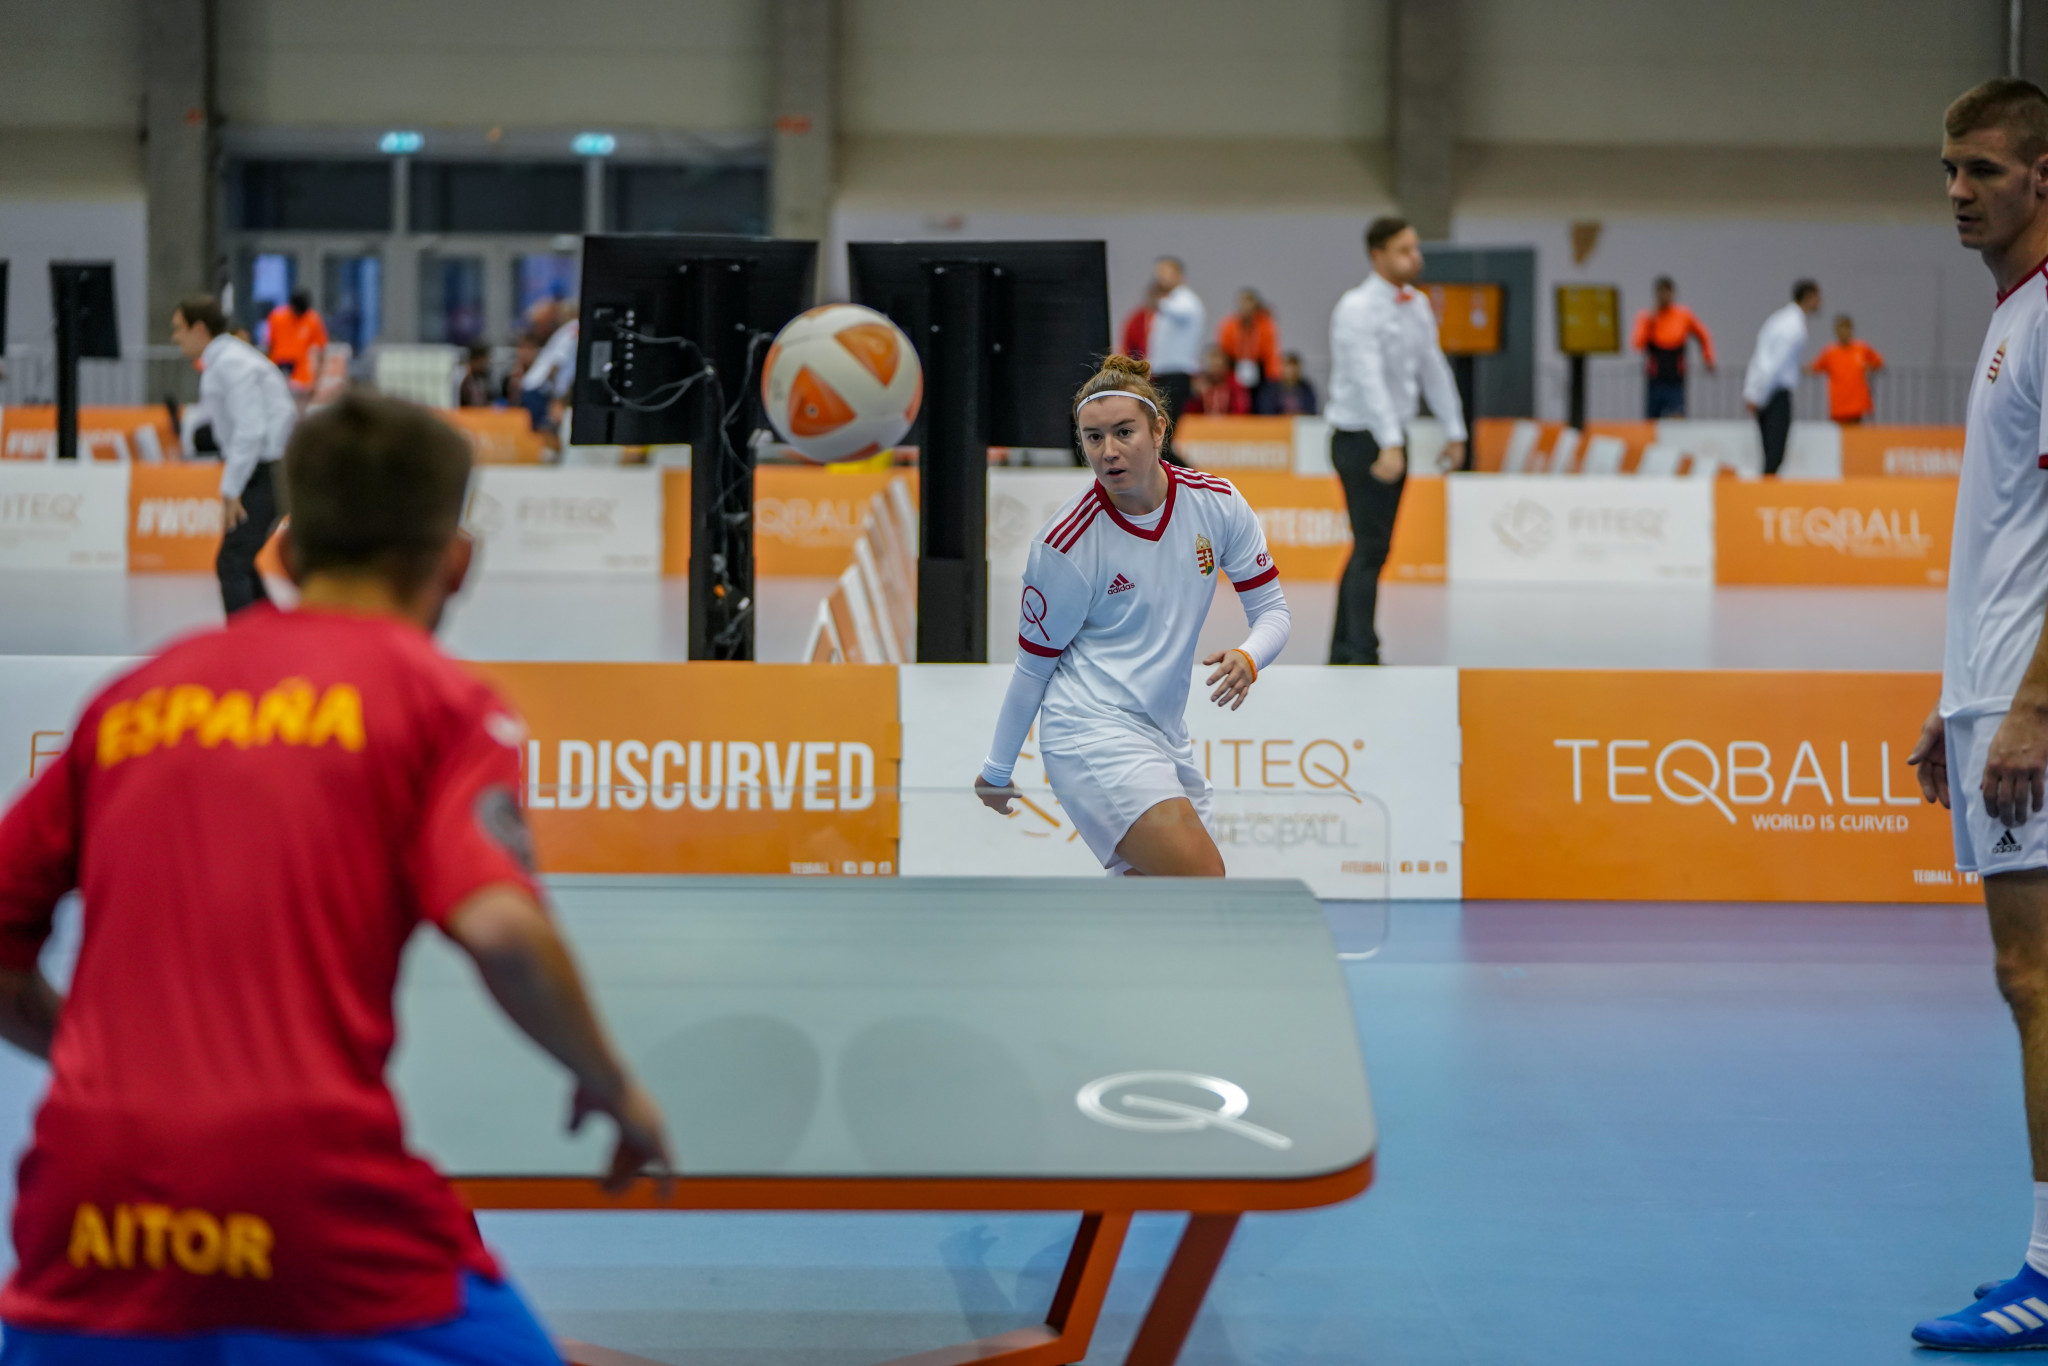 Teqball's gender equality has been praised  ©FITEQ